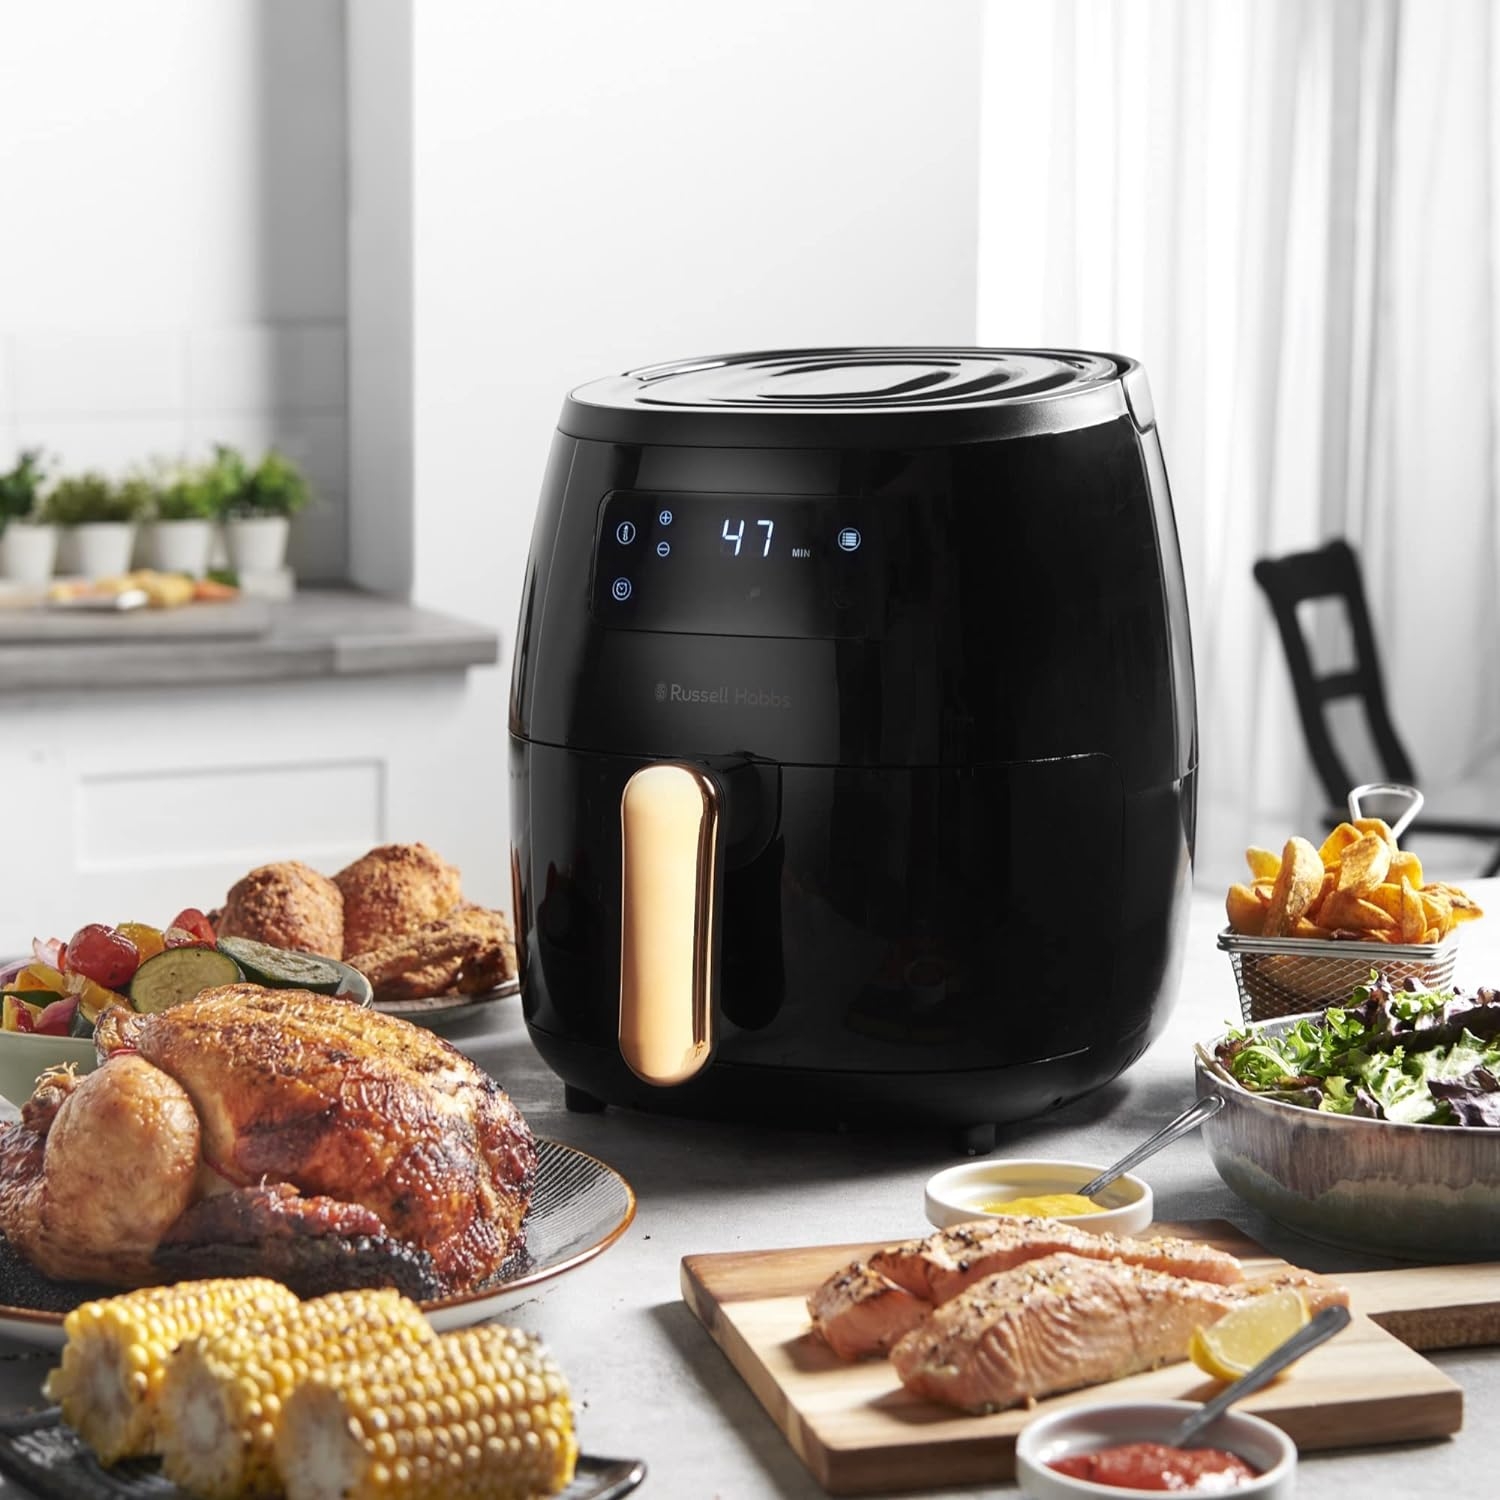 Russell Hobbs Brooklyn Digital Air Fryer, RHAF15, Large 5.7L Capacity, 7  Auto Air Fry Functions, Manual Mode Up to 200°C, Digital Touchscreen  Display, Dishwasher Safe Plate, Black/Copper - Chef Toolbox